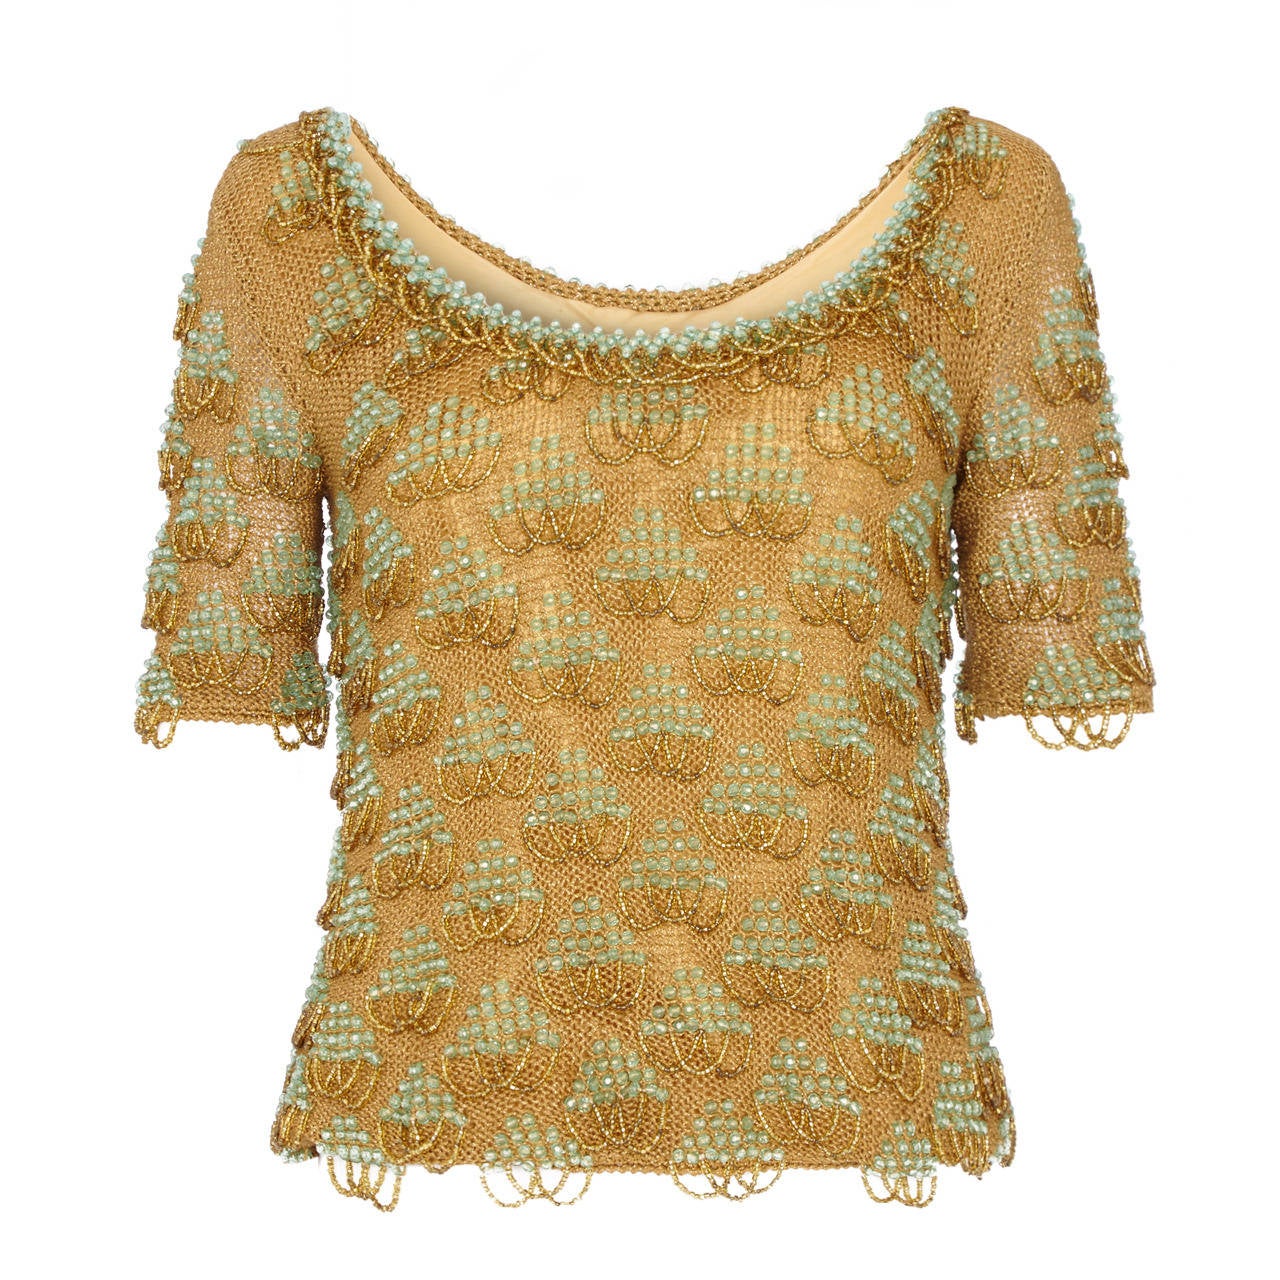 1960s Gold & Turquoise Beaded Top